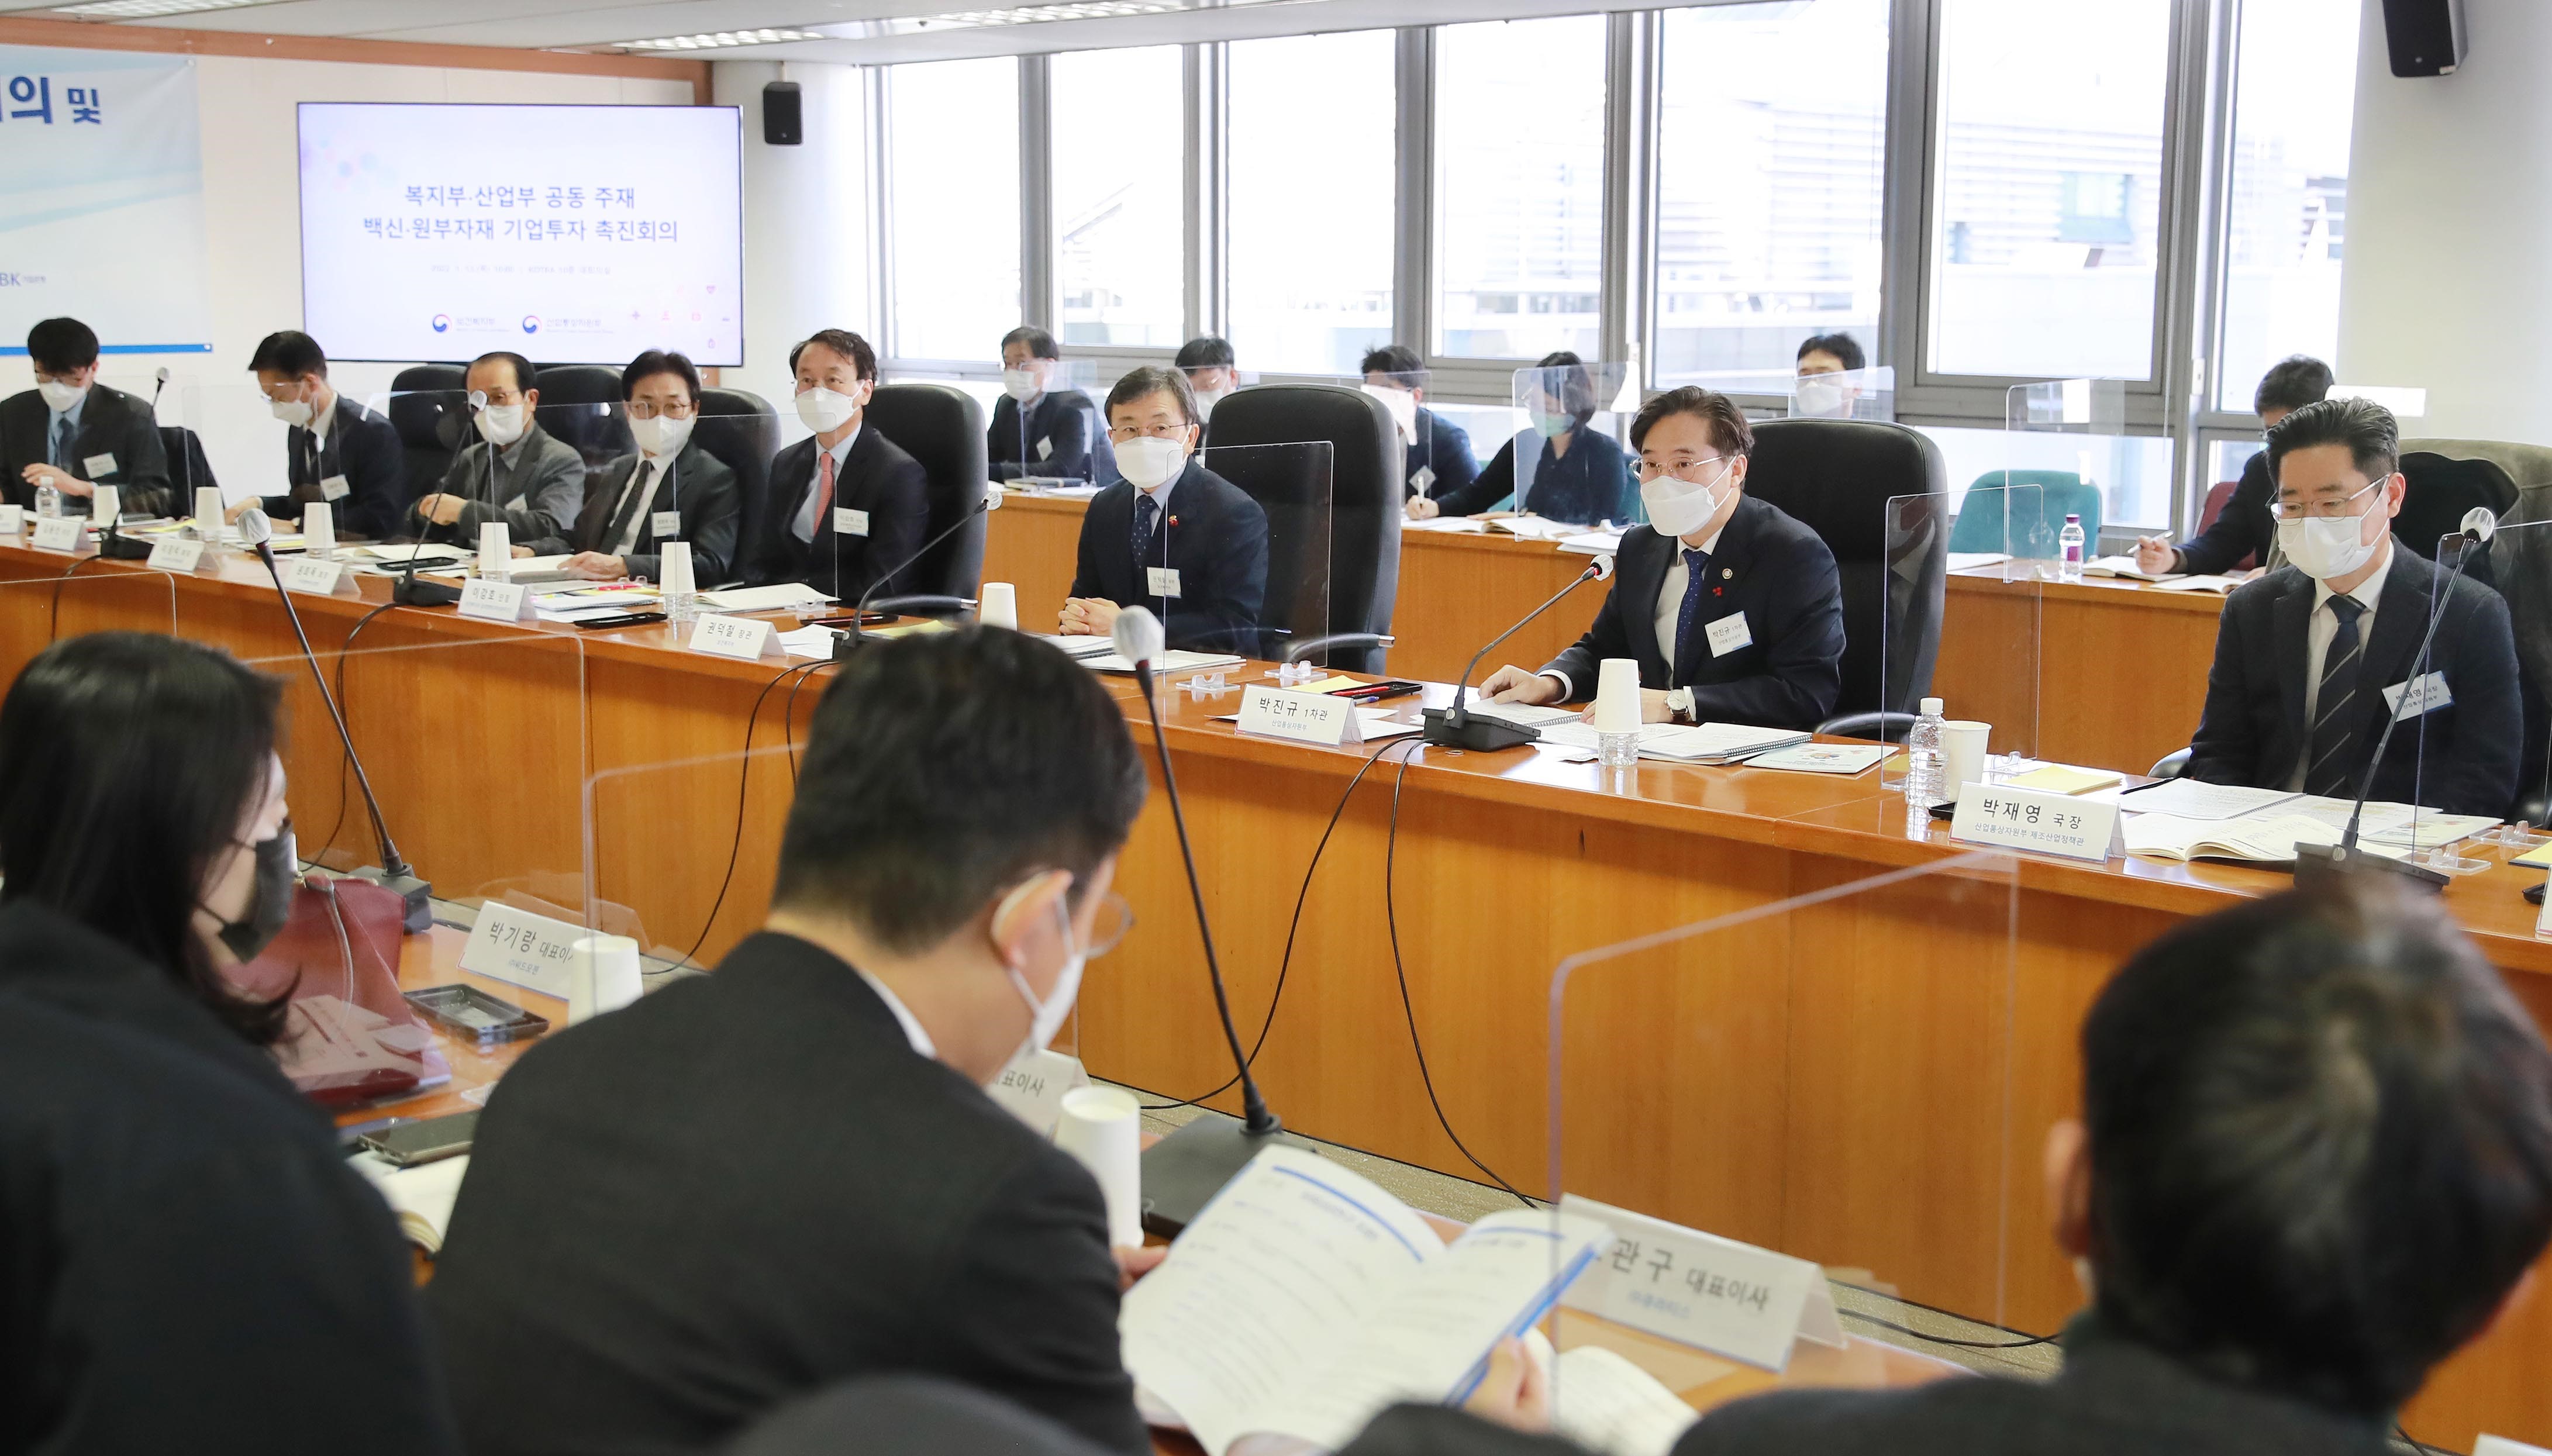 Corporate investment stimulus meeting for raw and subsidiary vaccine production materials